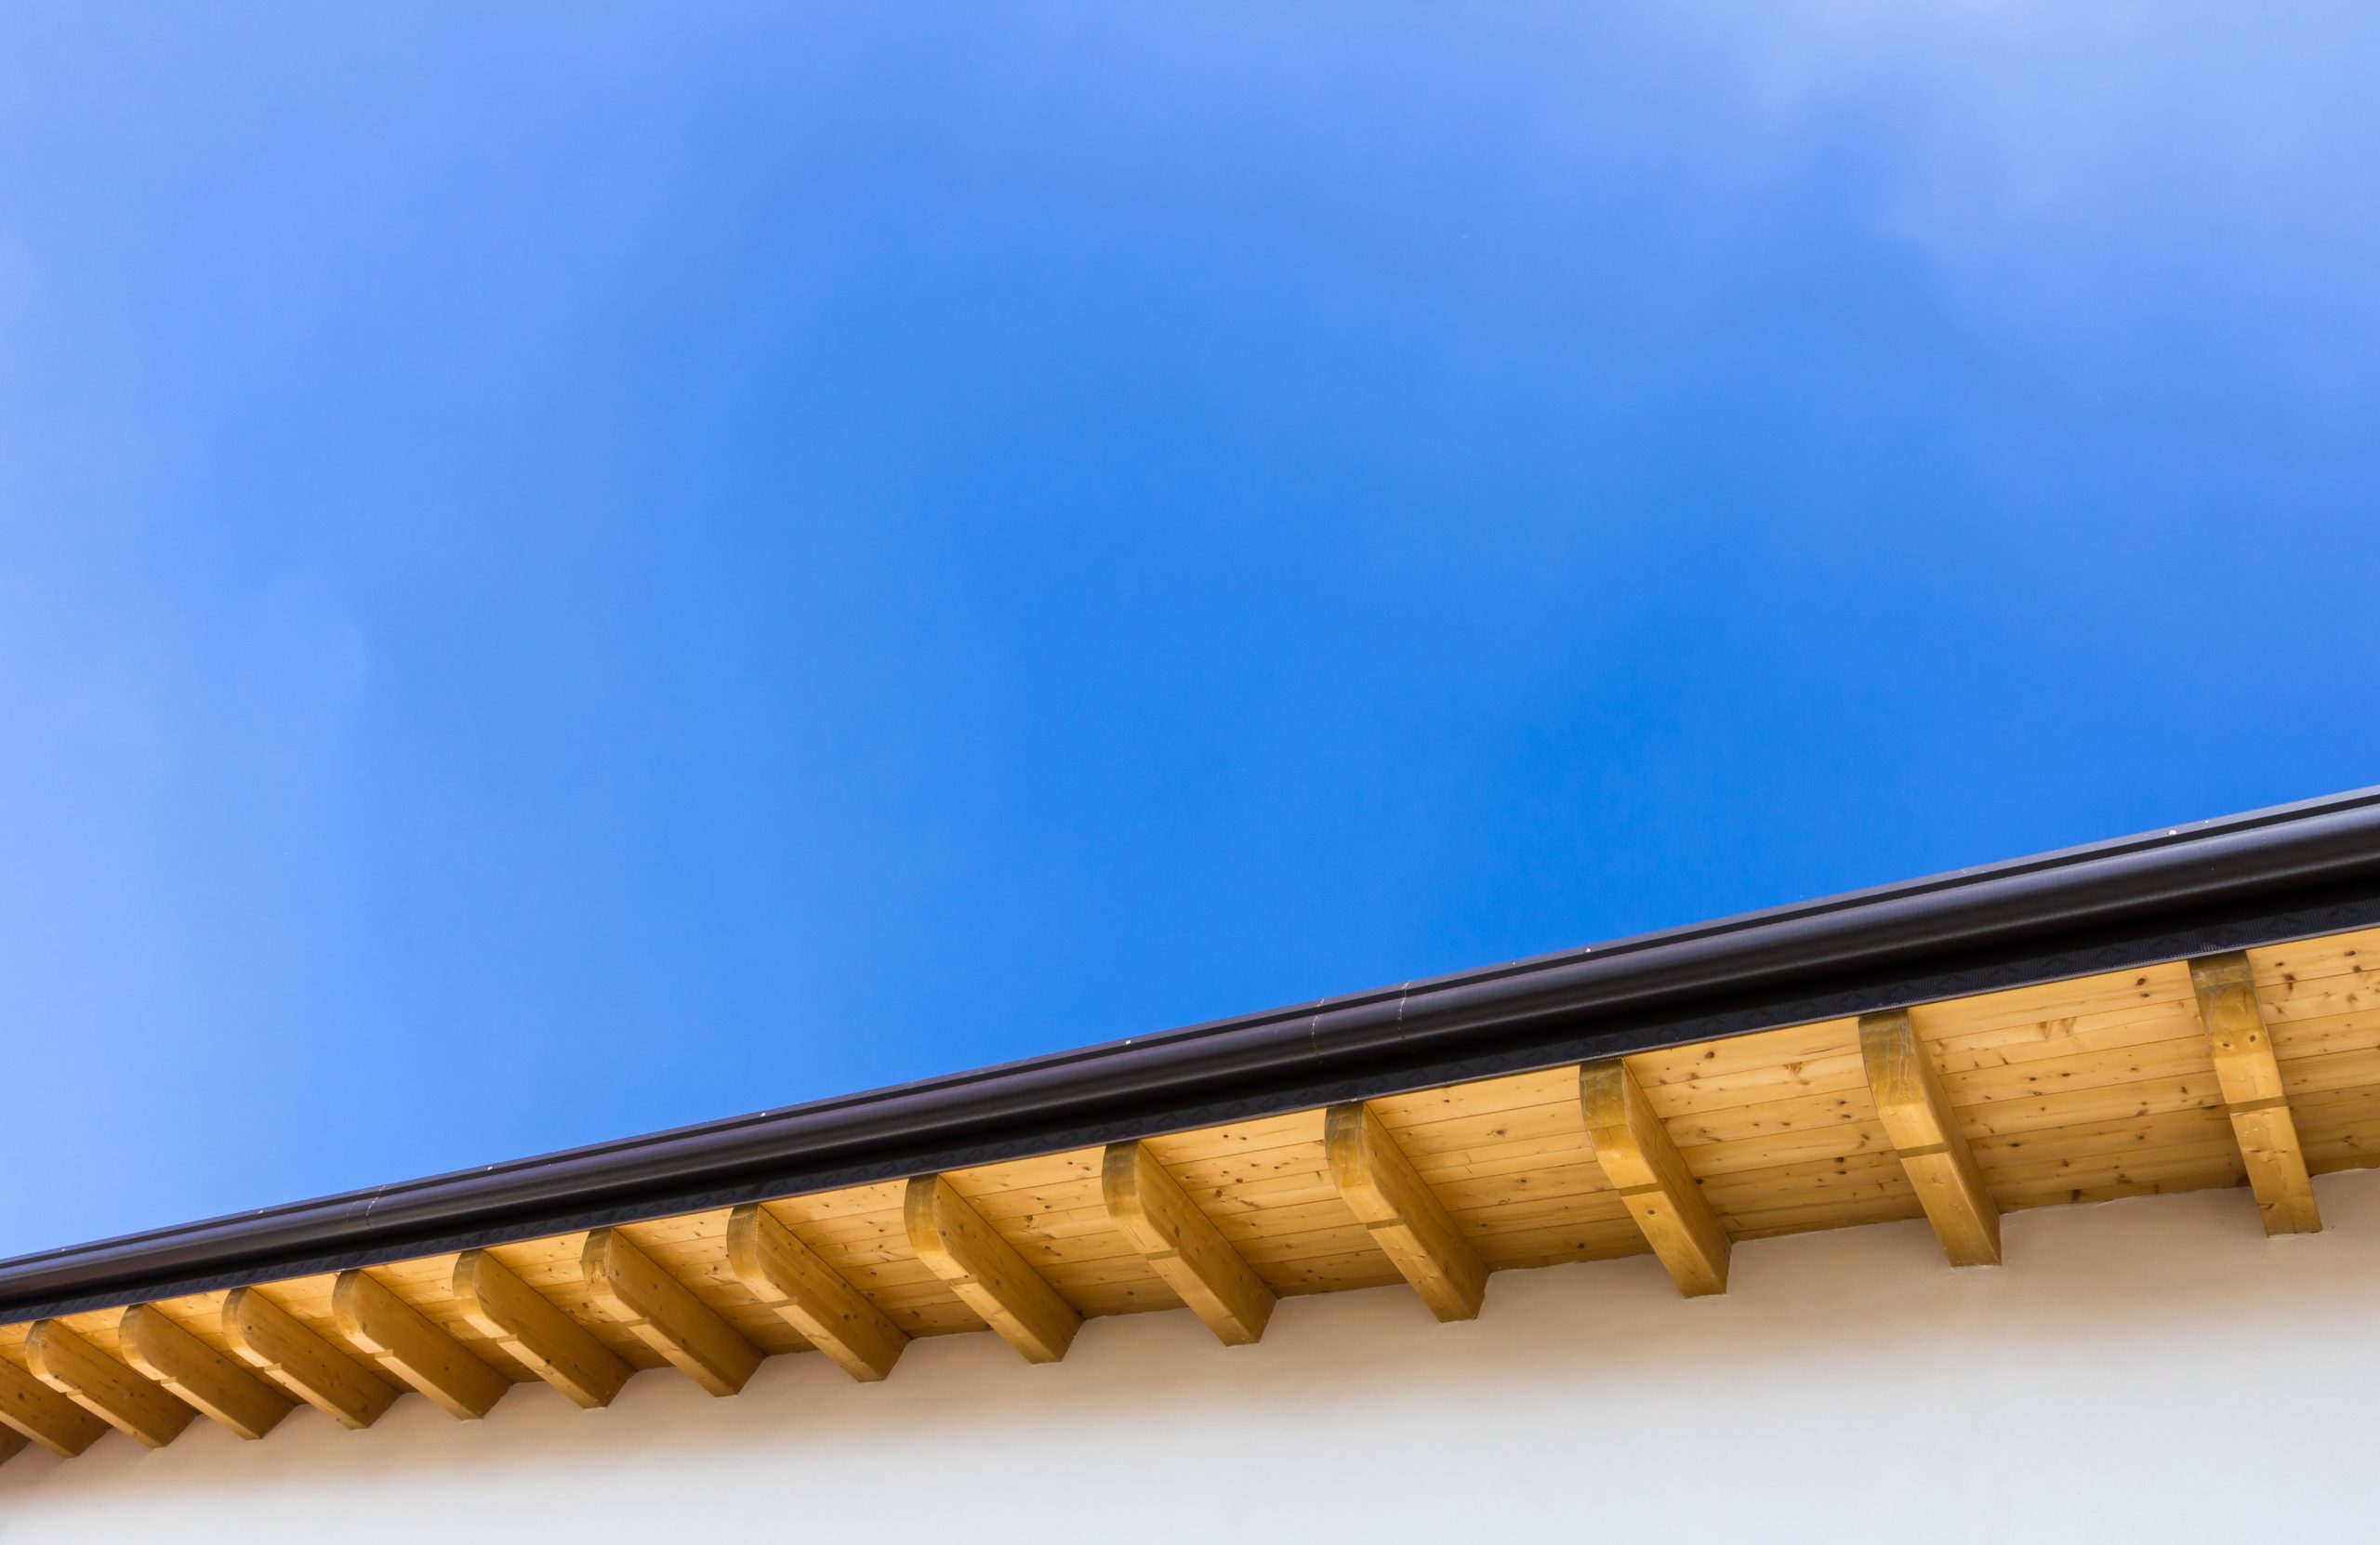 Is There a Big Difference Between 5 and 6 Inch Gutters?